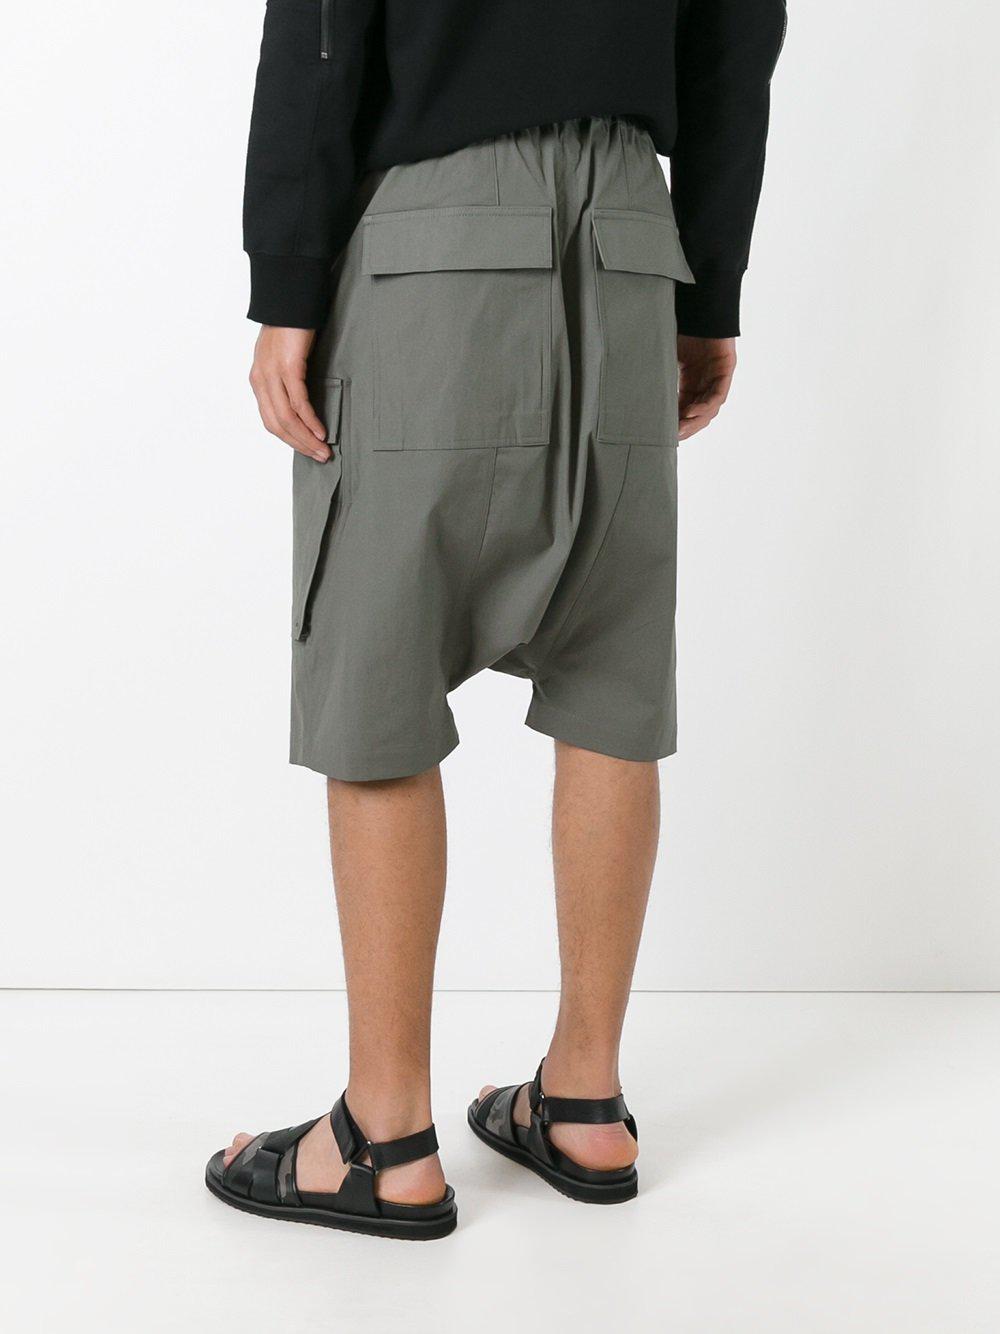 Rick Owens Cotton Pod Cargo Shorts in Grey (Gray) for Men - Lyst